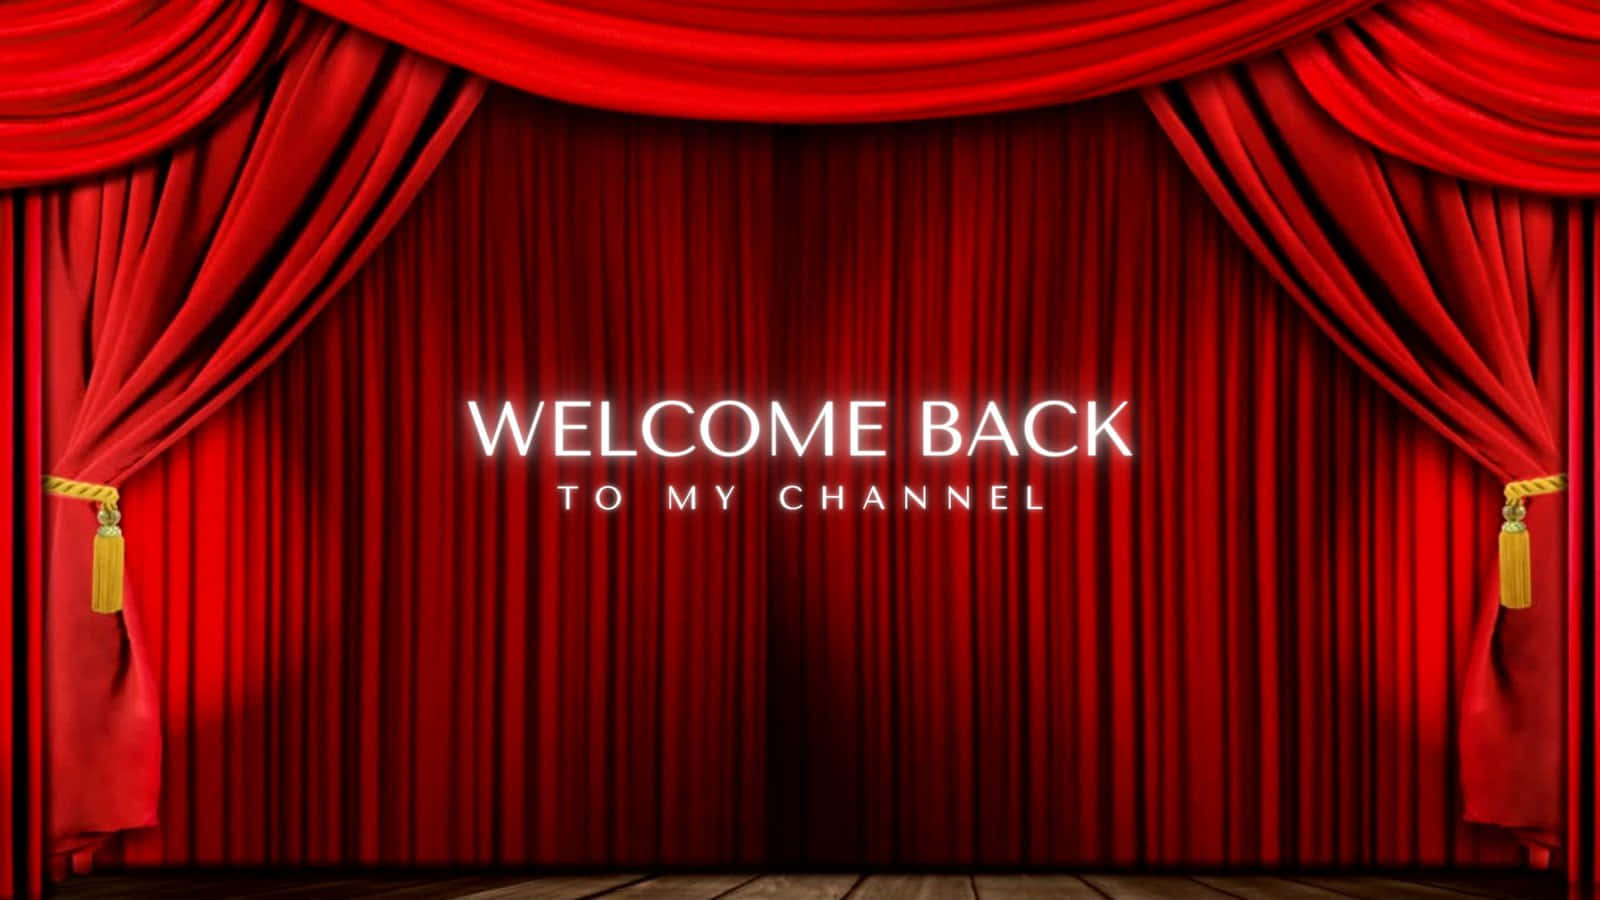 Red Curtain With Welcome Back To My Channel